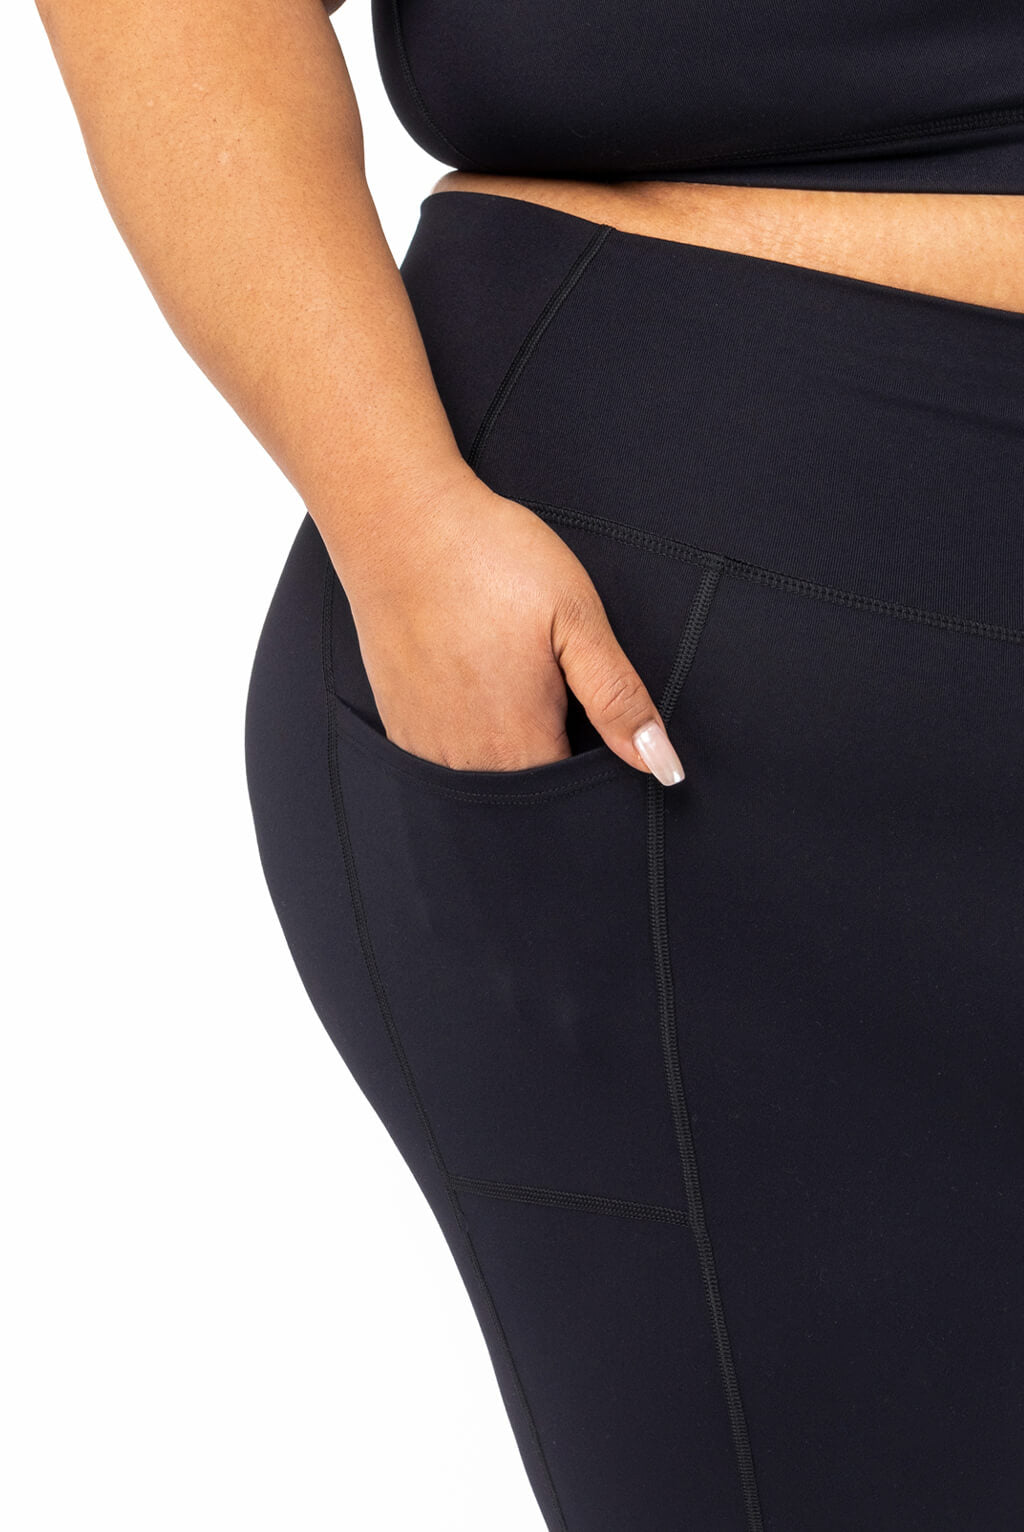 These Plus Size high waisted compression capri leggings have a